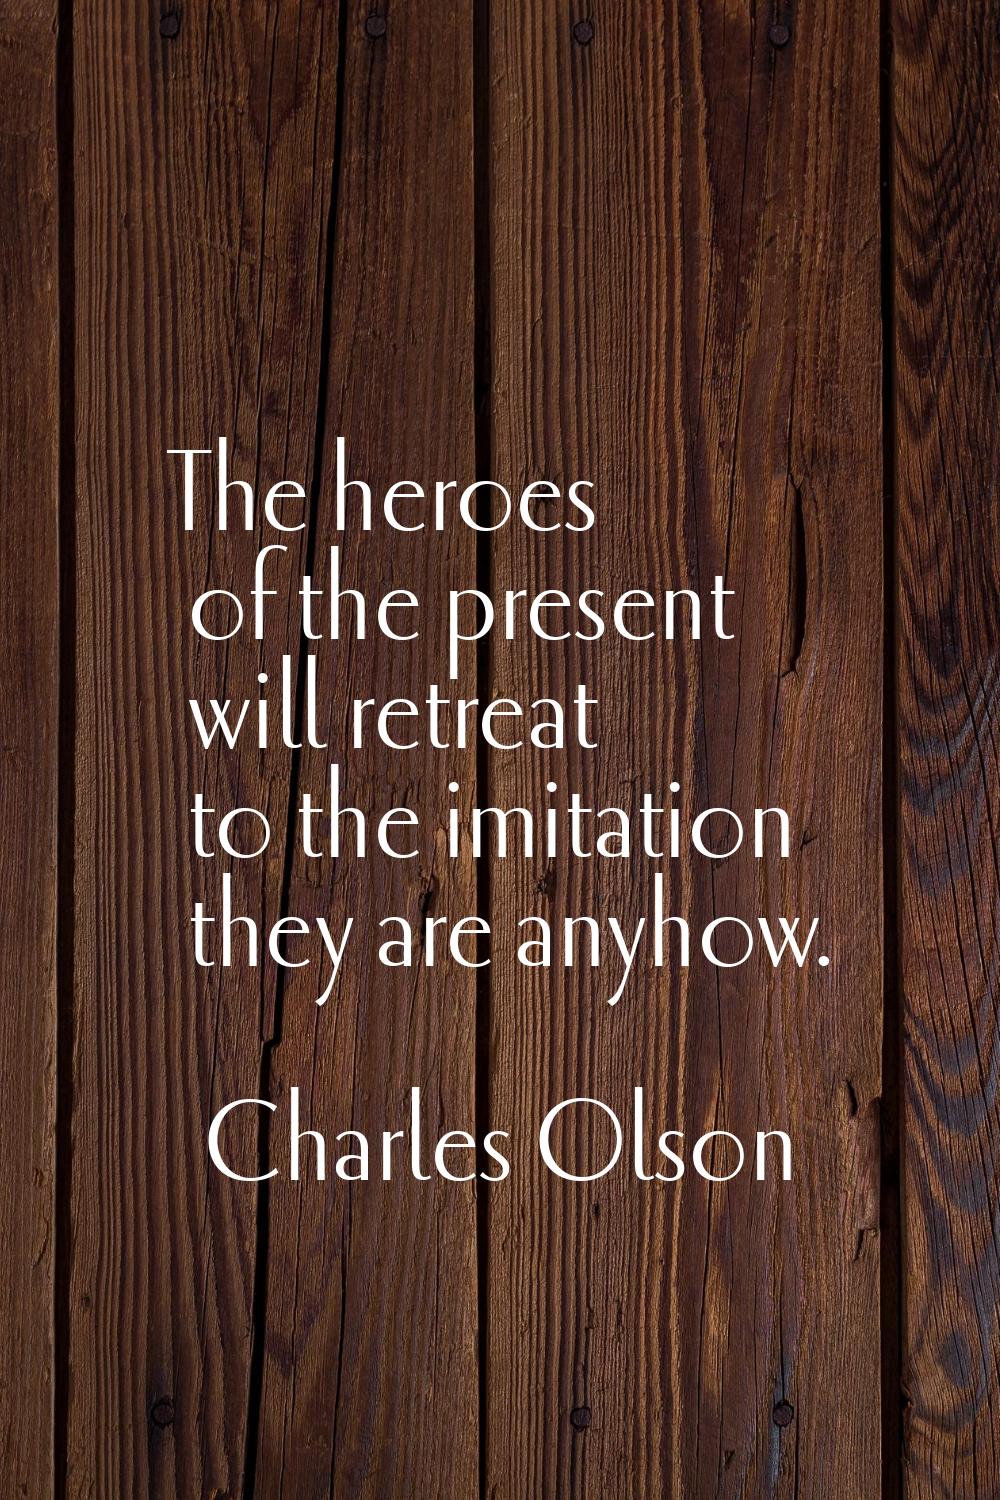 The heroes of the present will retreat to the imitation they are anyhow.